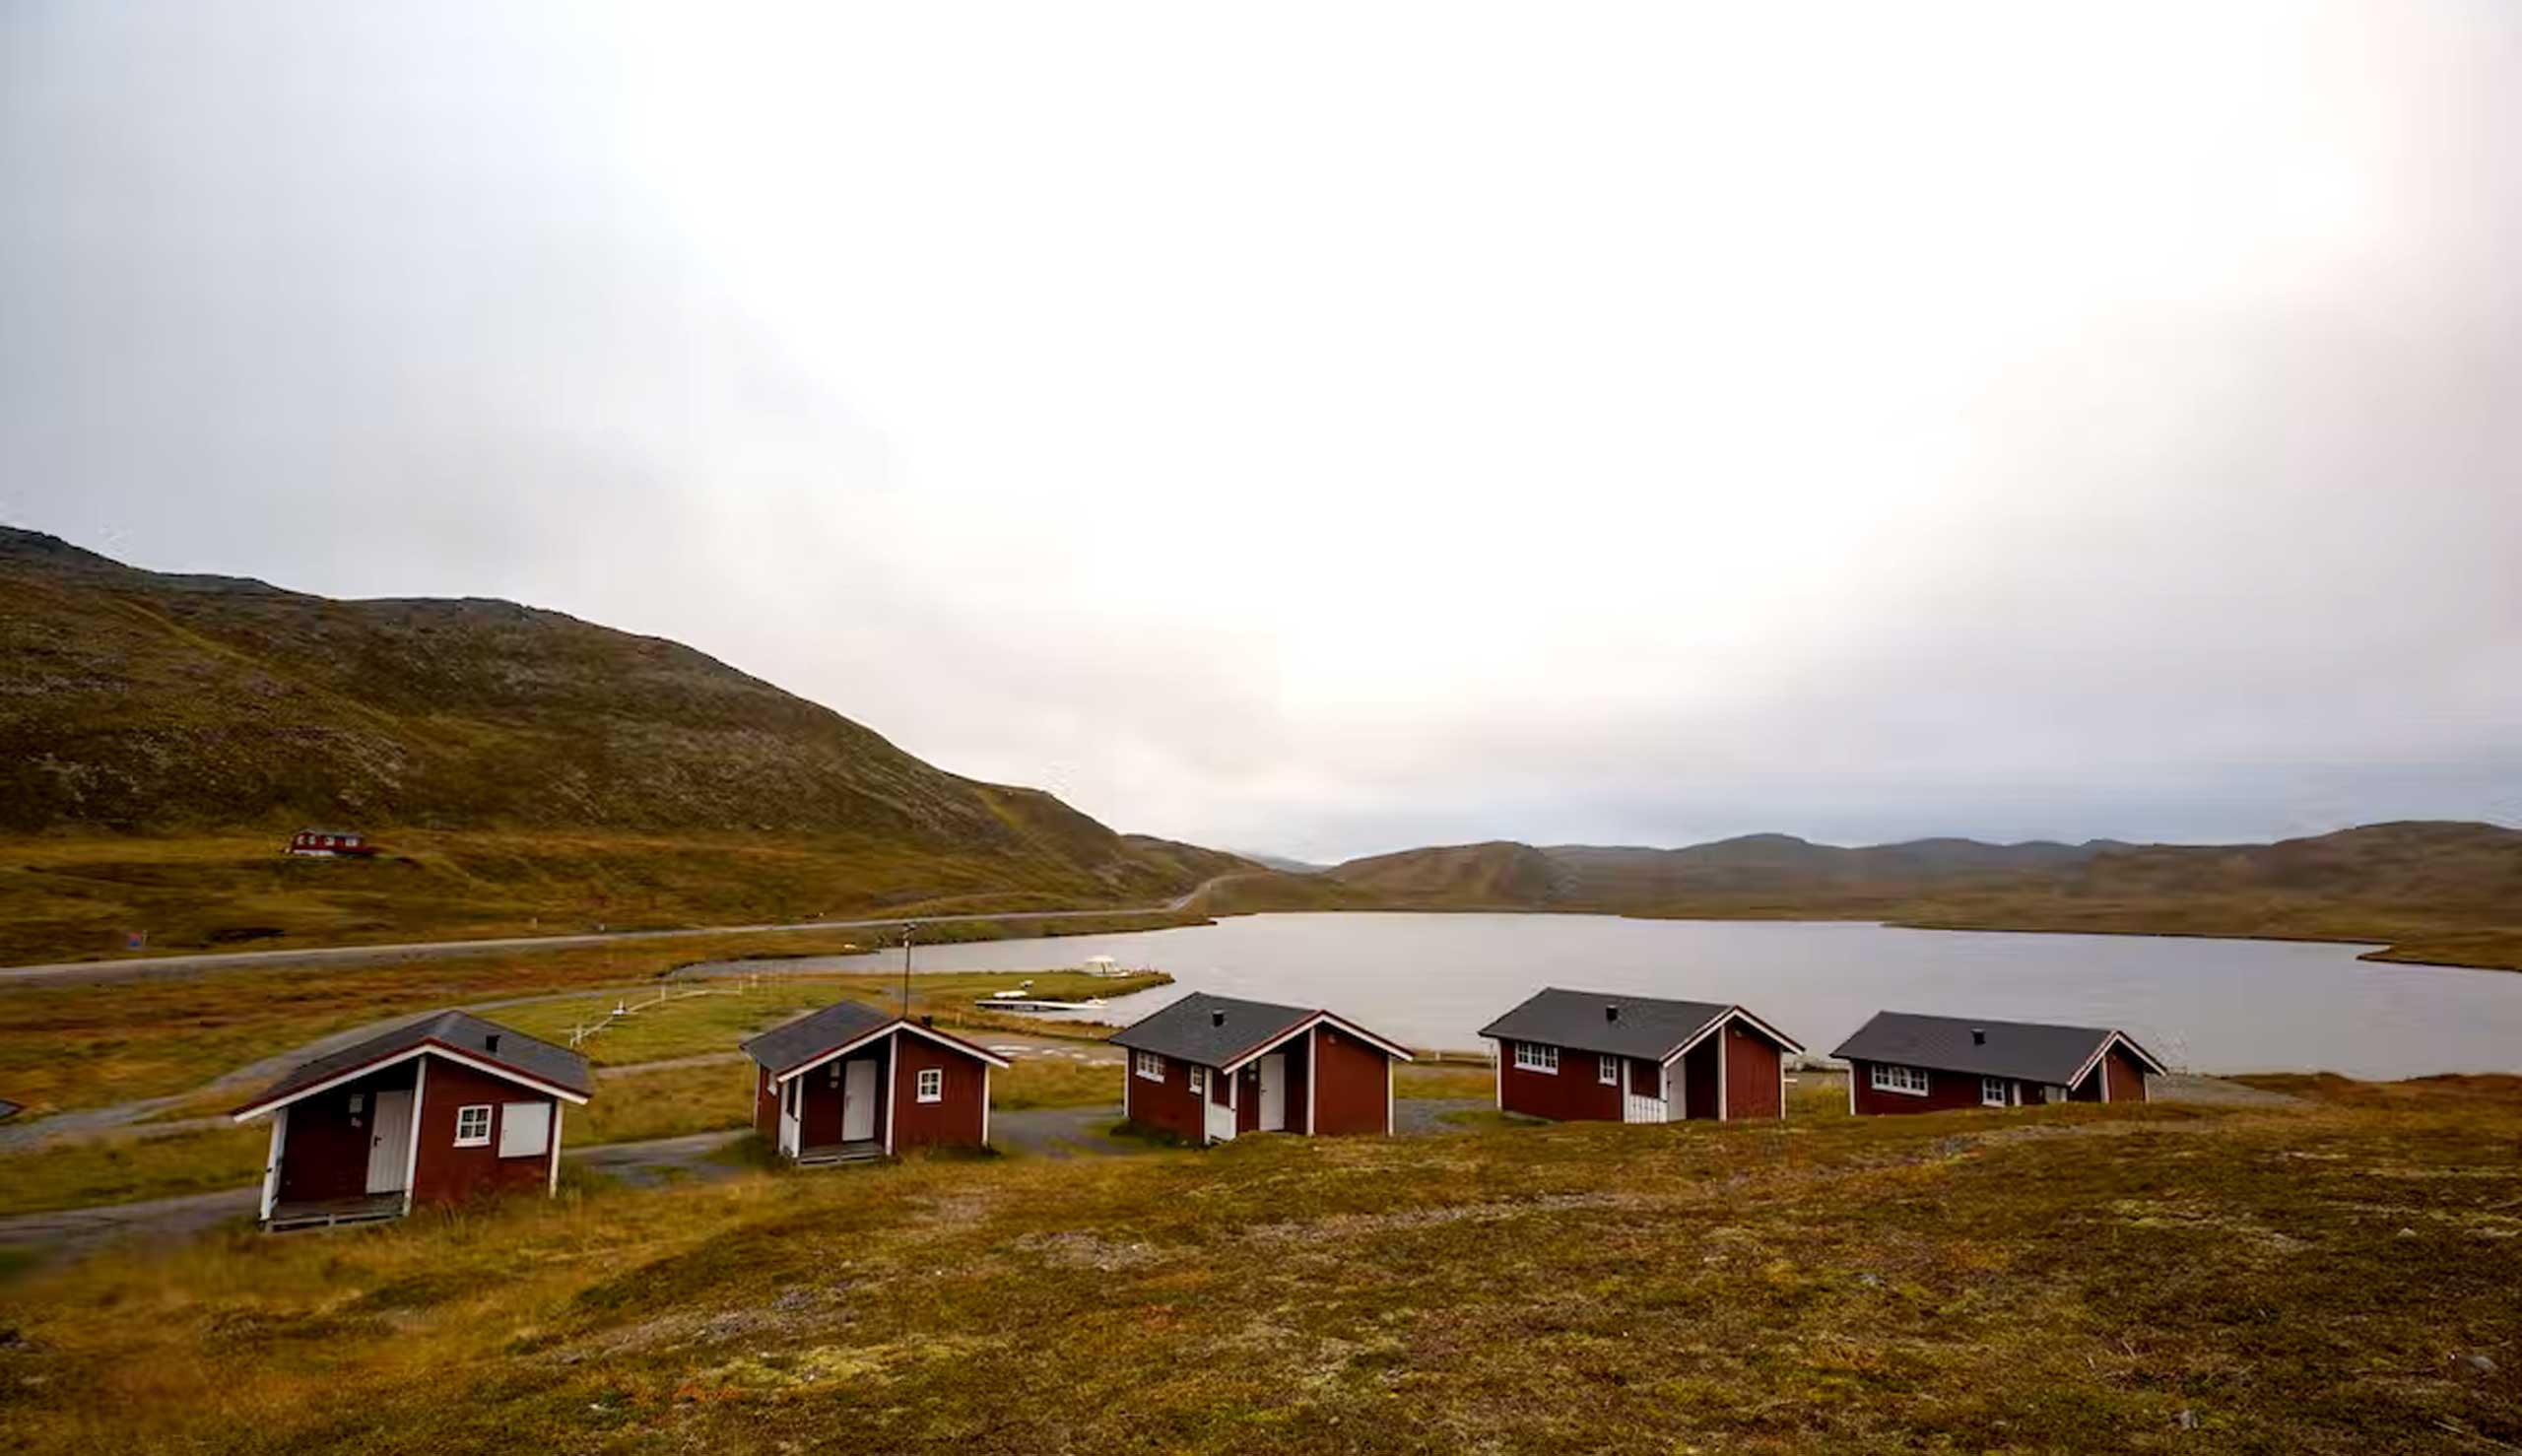 There are also cabins at BaseCamp North Cape. Copyright: Pincamp.de